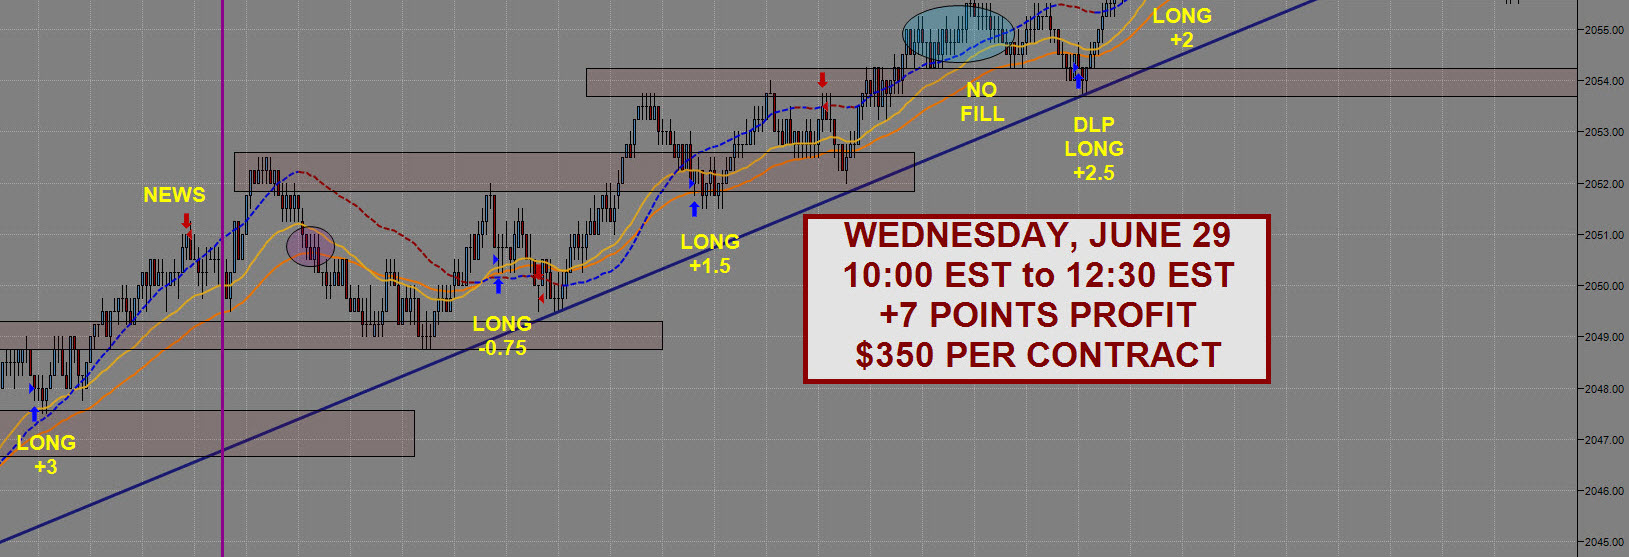 emini s&p day trading system